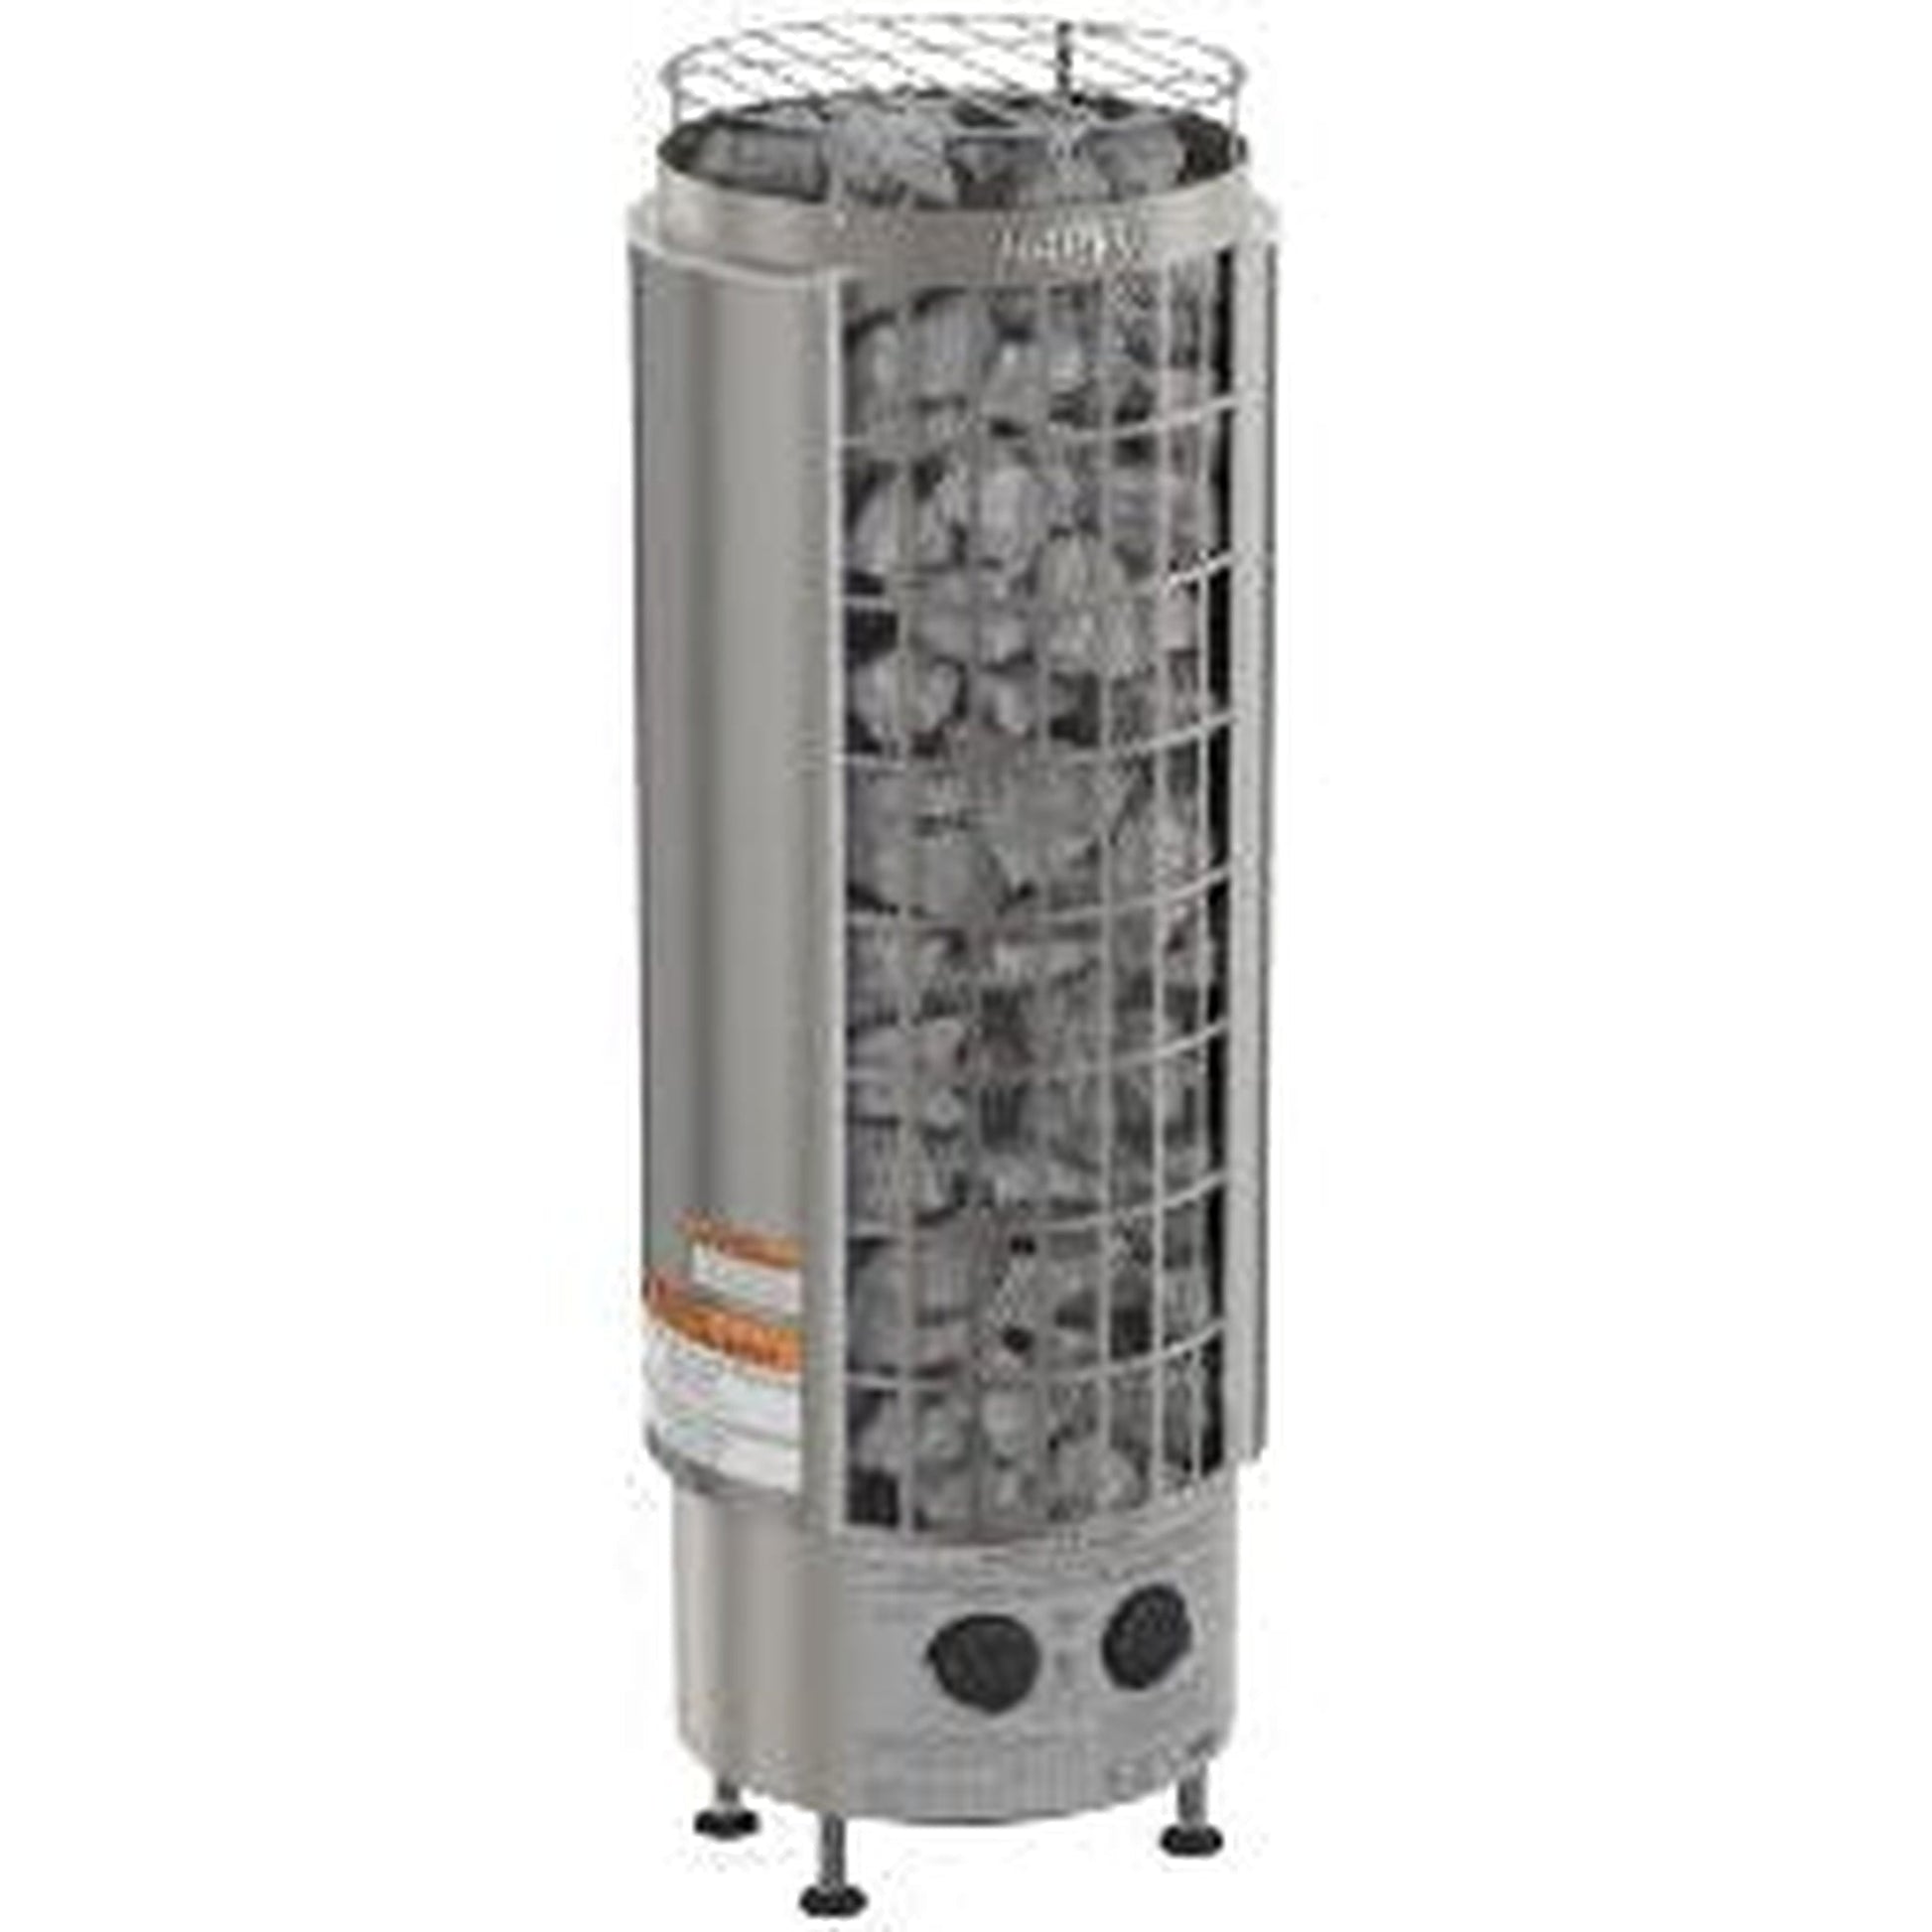 Harvia Cilindro Half Series 8 kW 240V 1PH Freestanding Stainless Steel Electric Sauna Heater With Built-In Timer and Temperature Control